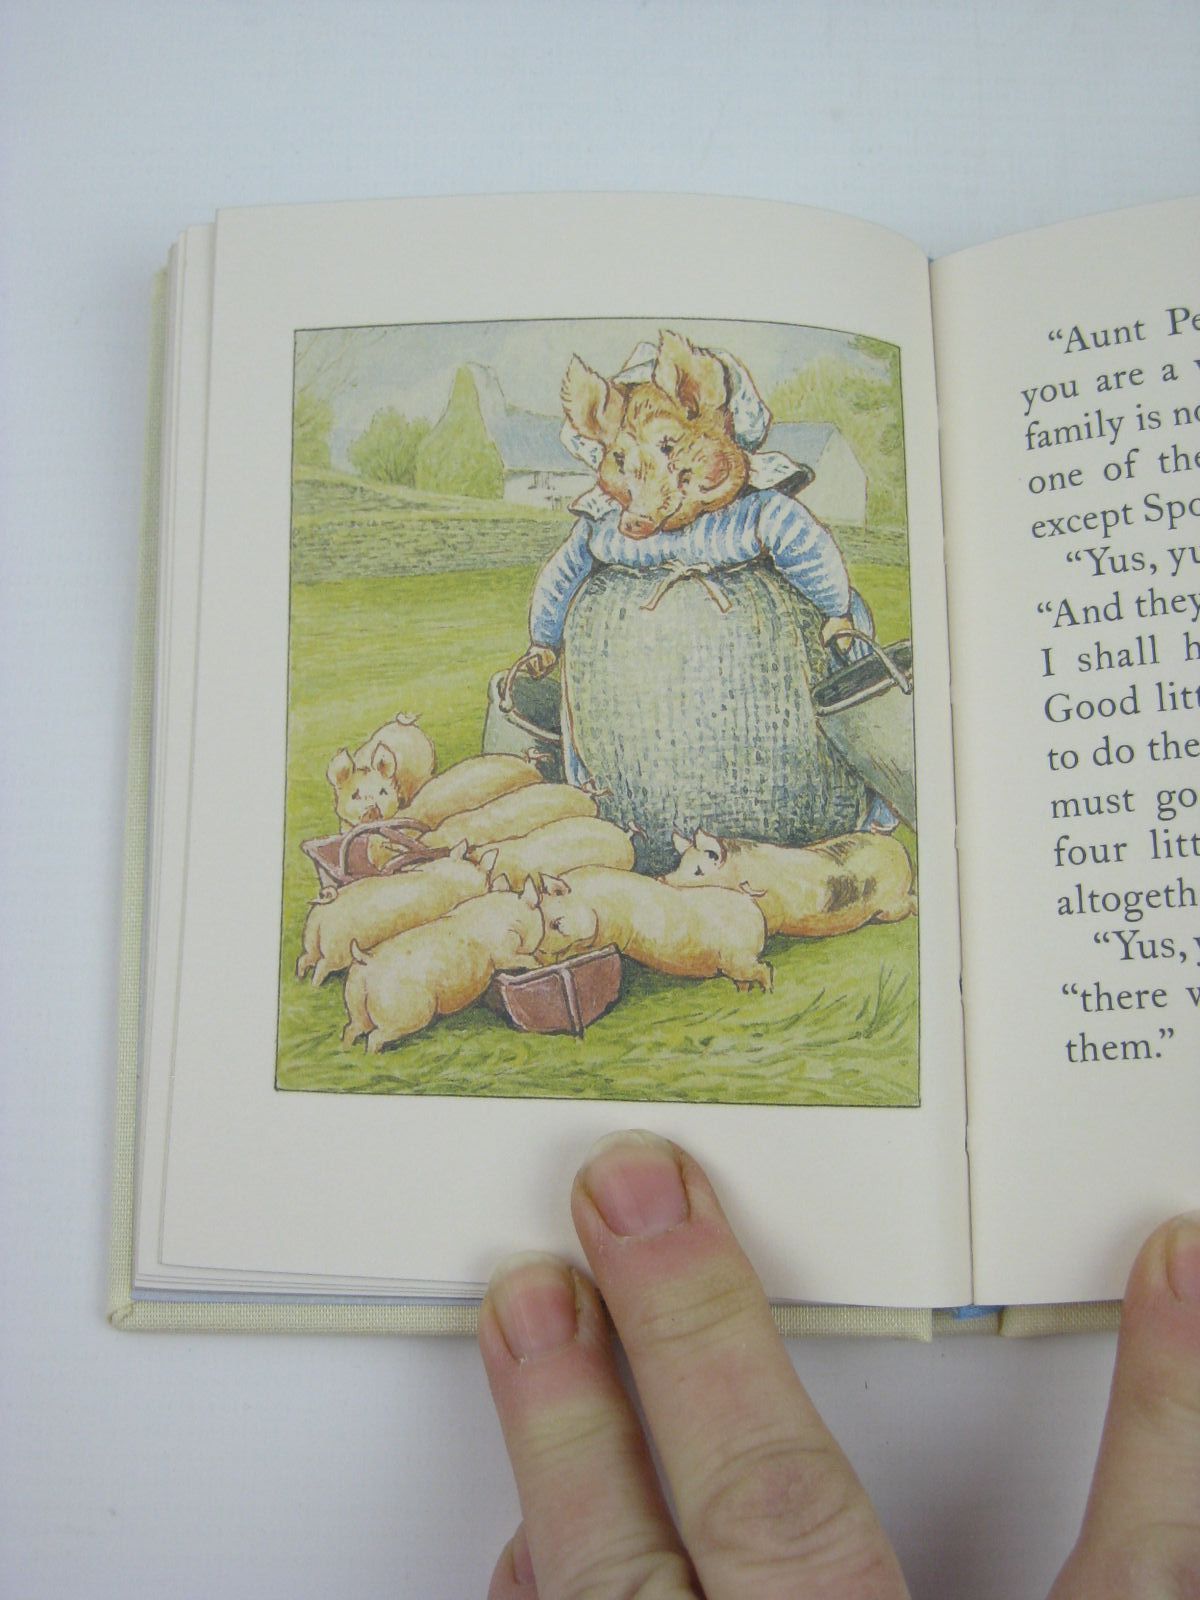 Photo of THE TALE OF PIGLING BLAND written by Potter, Beatrix illustrated by Potter, Beatrix published by Frederick Warne, The Penguin Group (STOCK CODE: 1316334)  for sale by Stella & Rose's Books